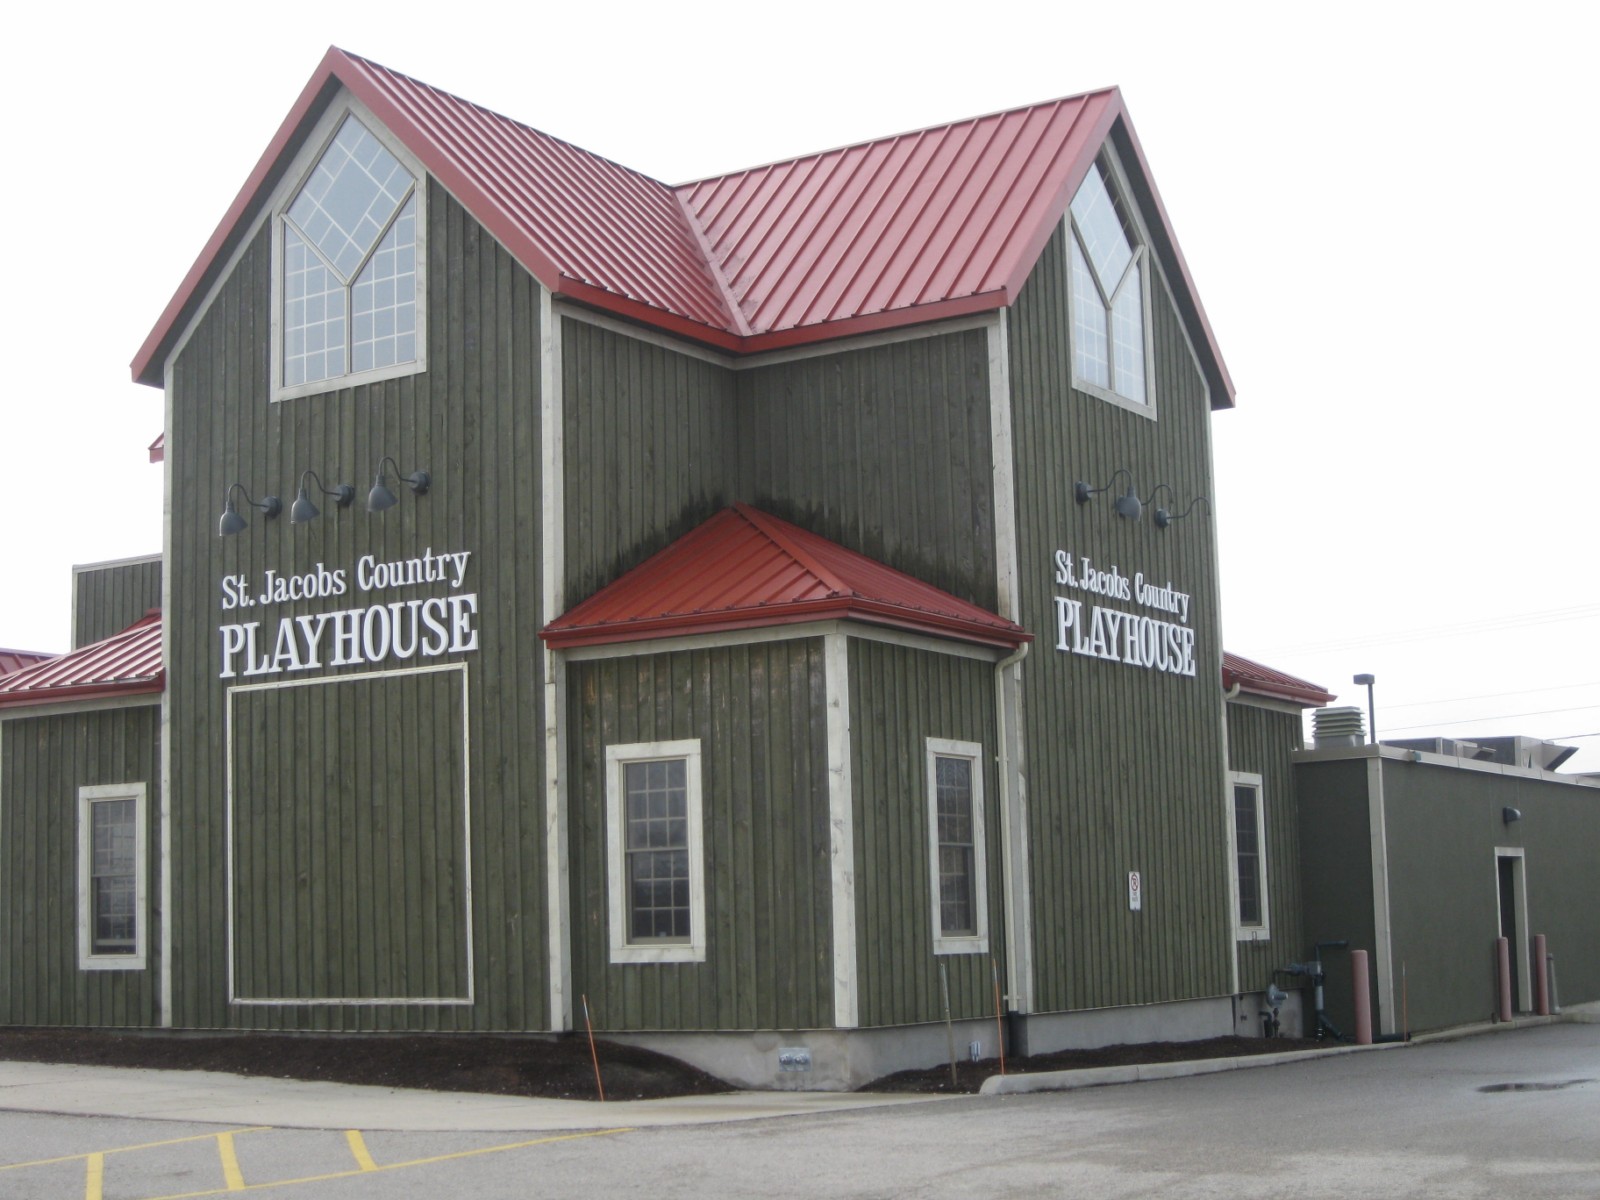 St. Jacobs Country Playhouse Google image from http://www.michelle-wright.com/blog/wp-content/uploads/2011/12/St-Jacobs-Playhouse.jpg